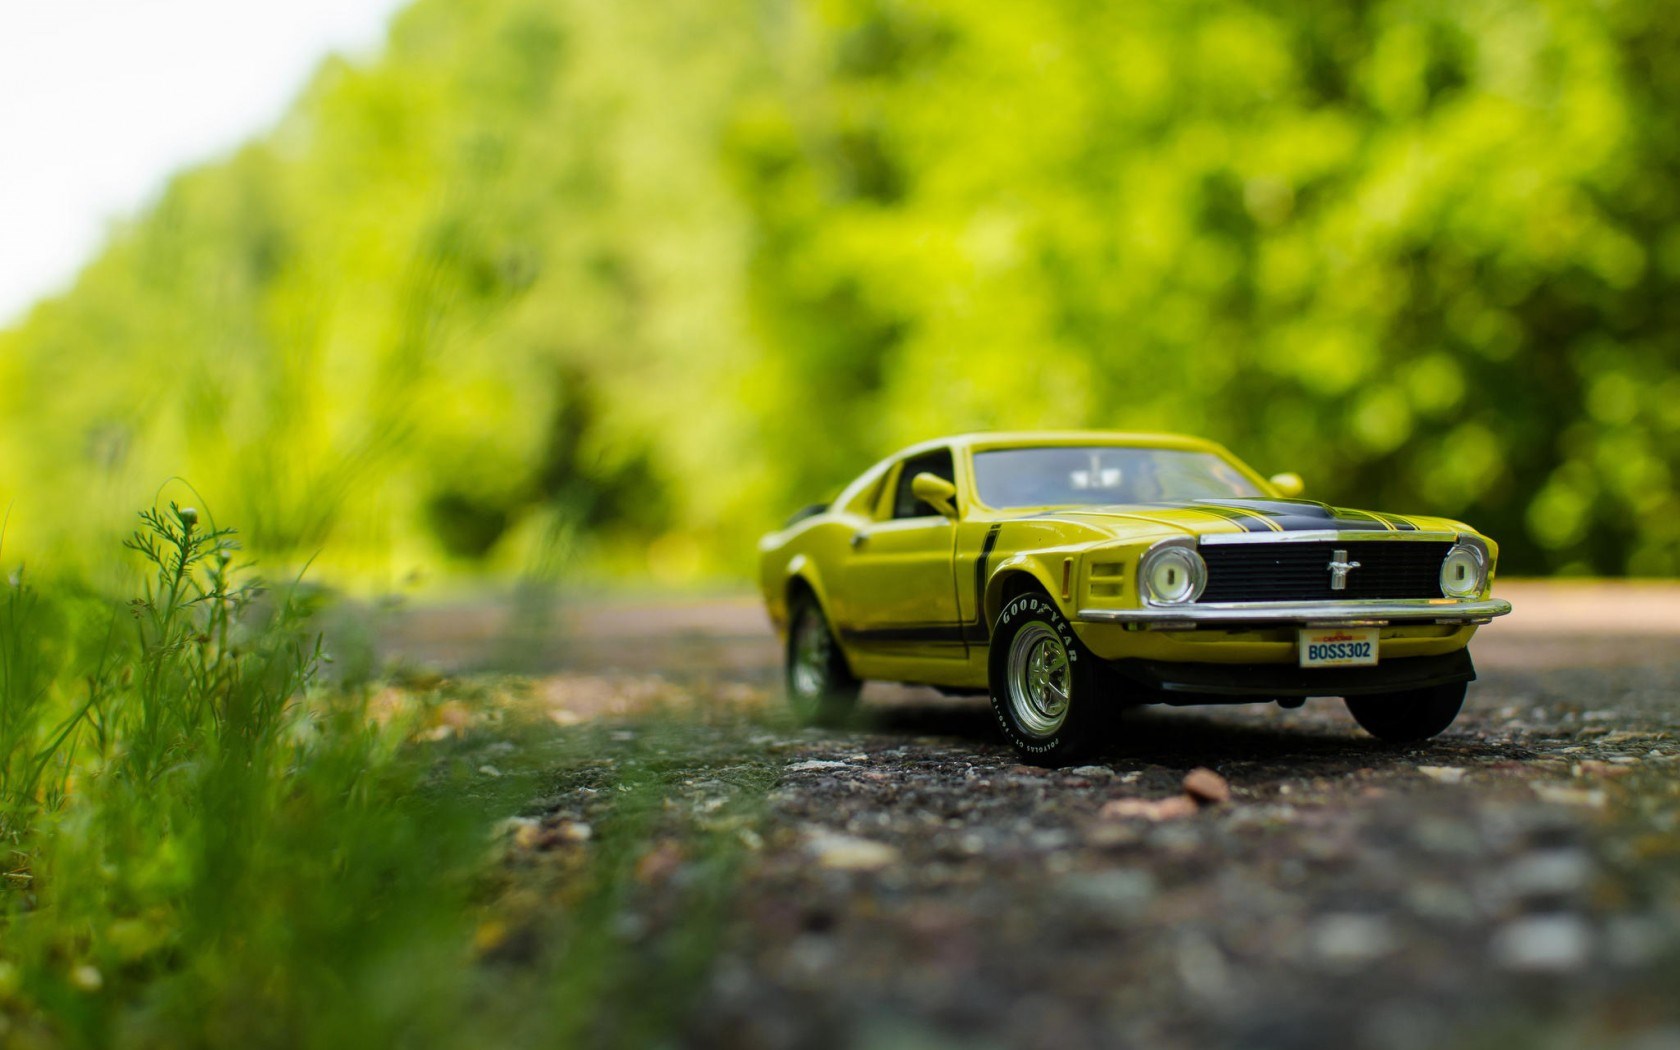 Full Hd Toy Wallpapers Full Hd Pictures - Car Toys Photography - HD Wallpaper 